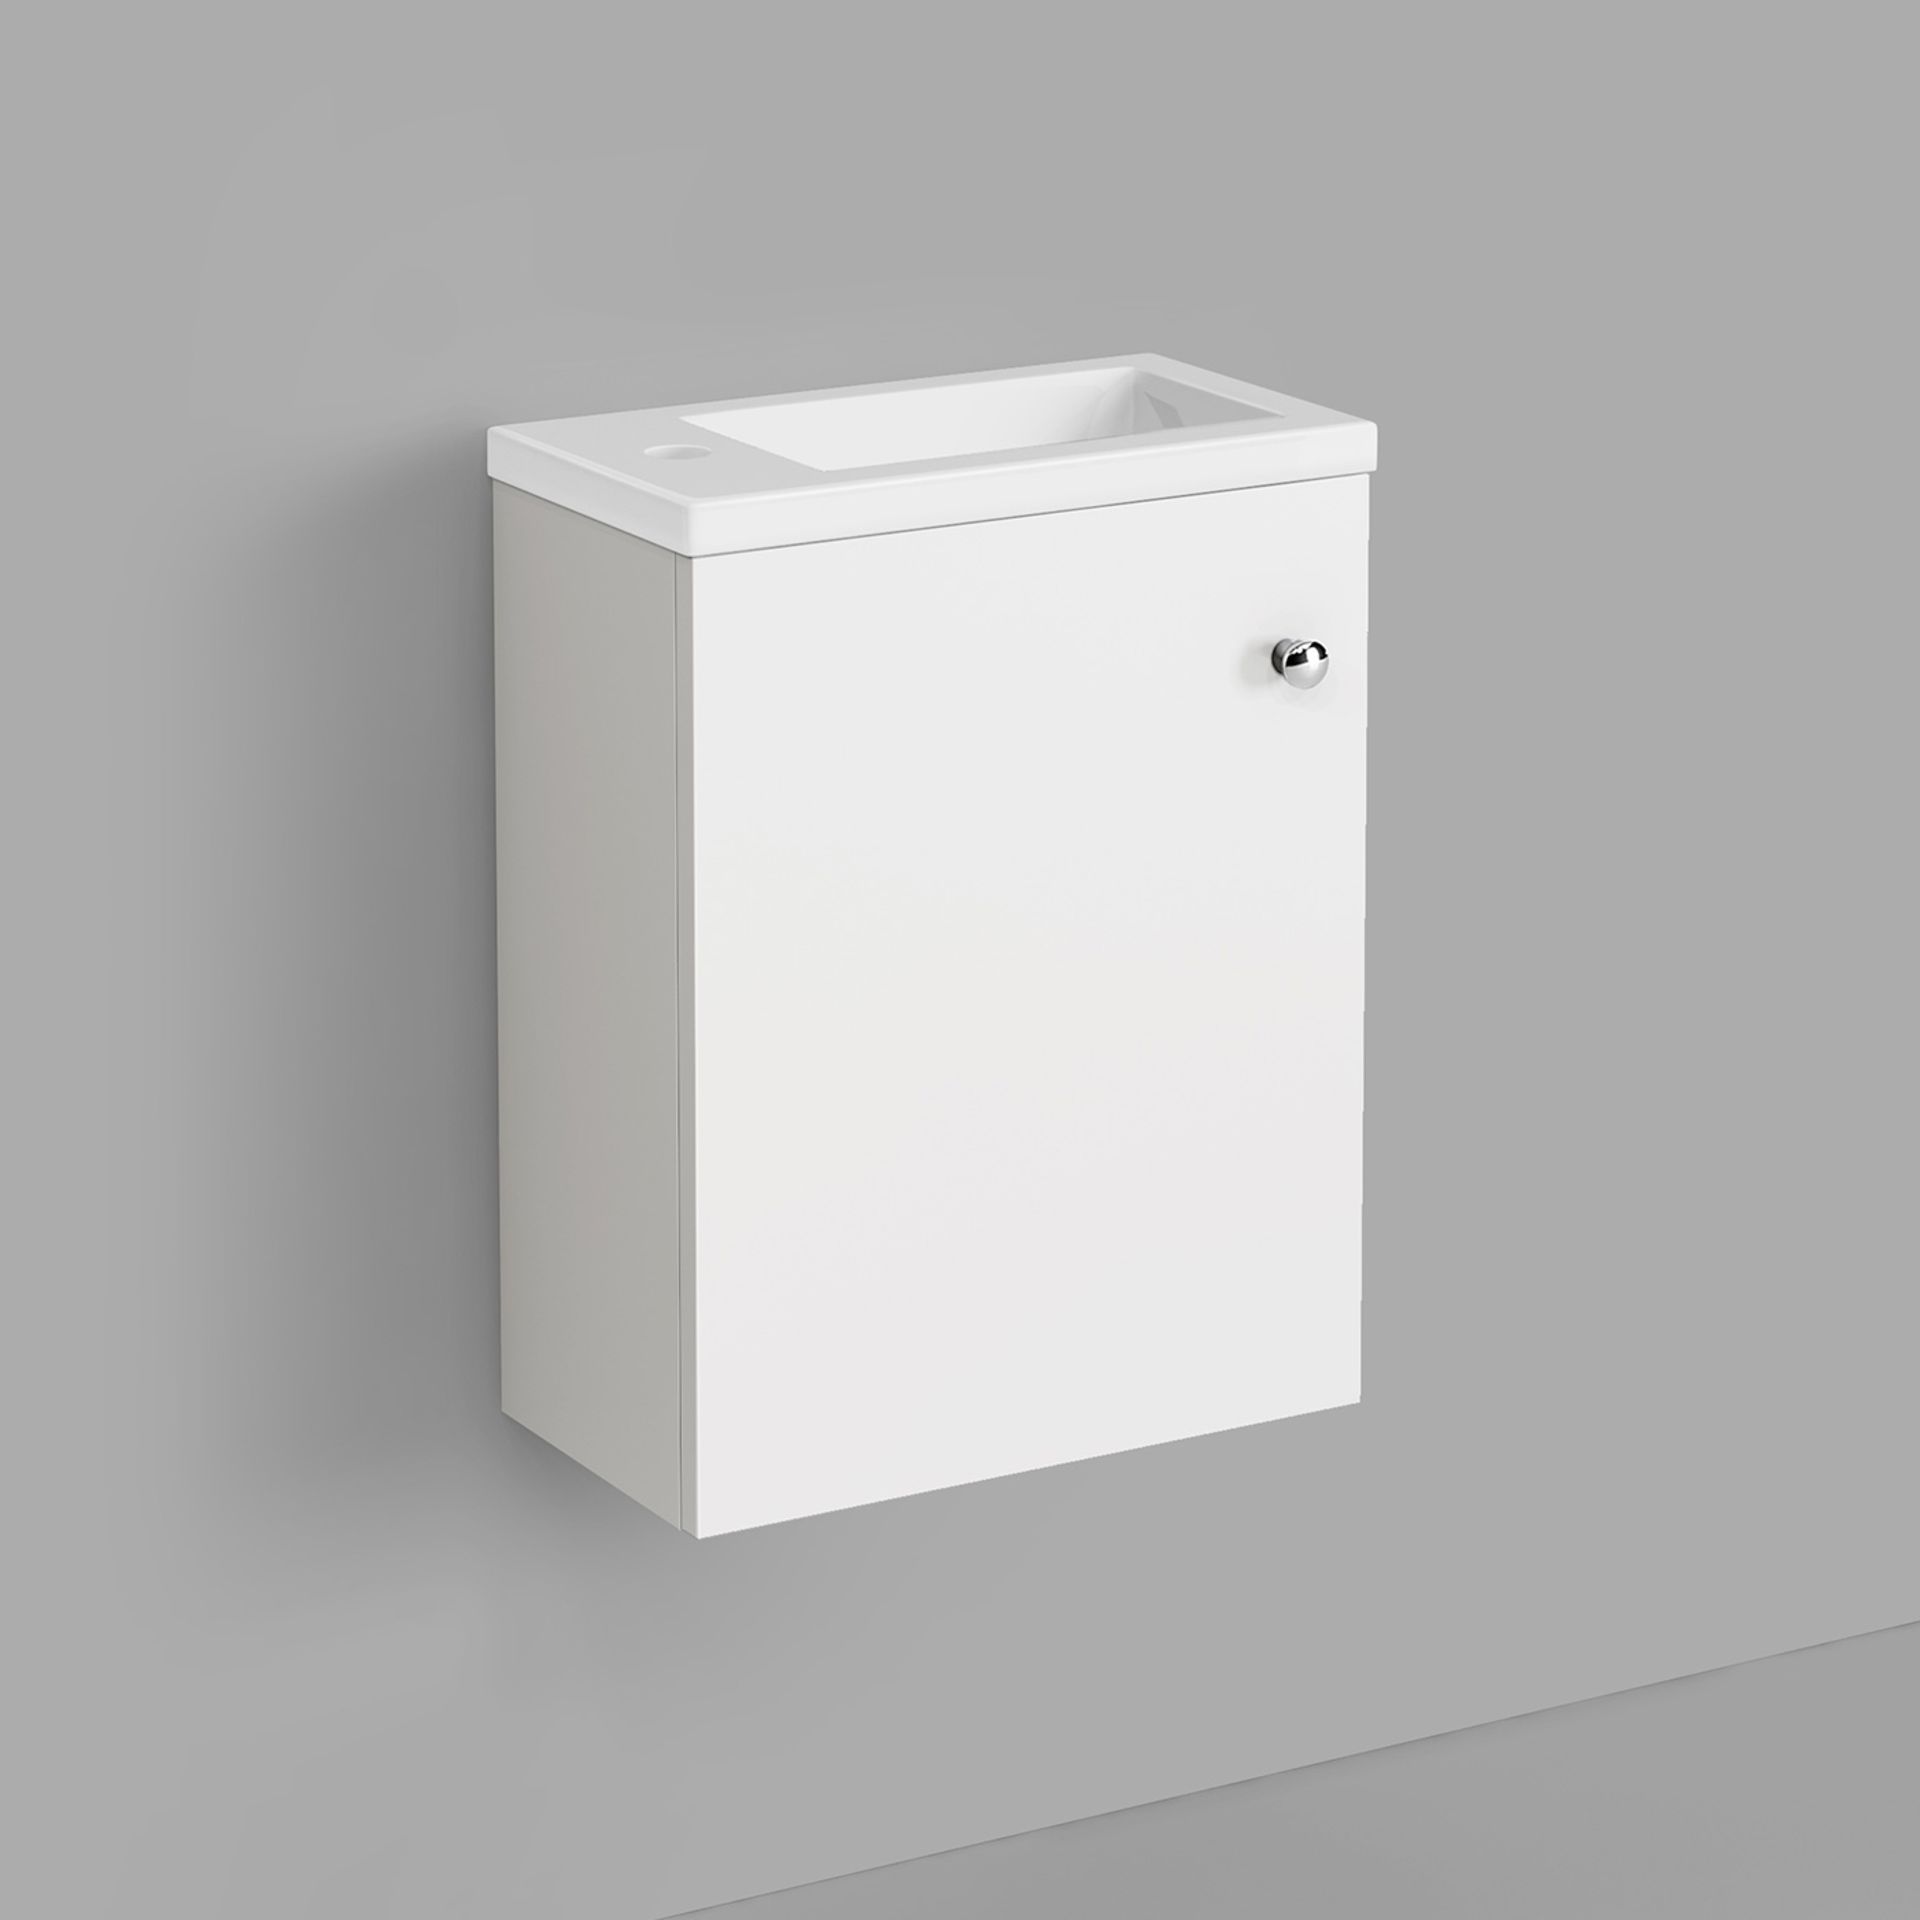 400mm Blanc Matte White Basin Unit - Wall Hung. RRP £179.99. Brand New Stock. Freeing up floor space - Image 5 of 6